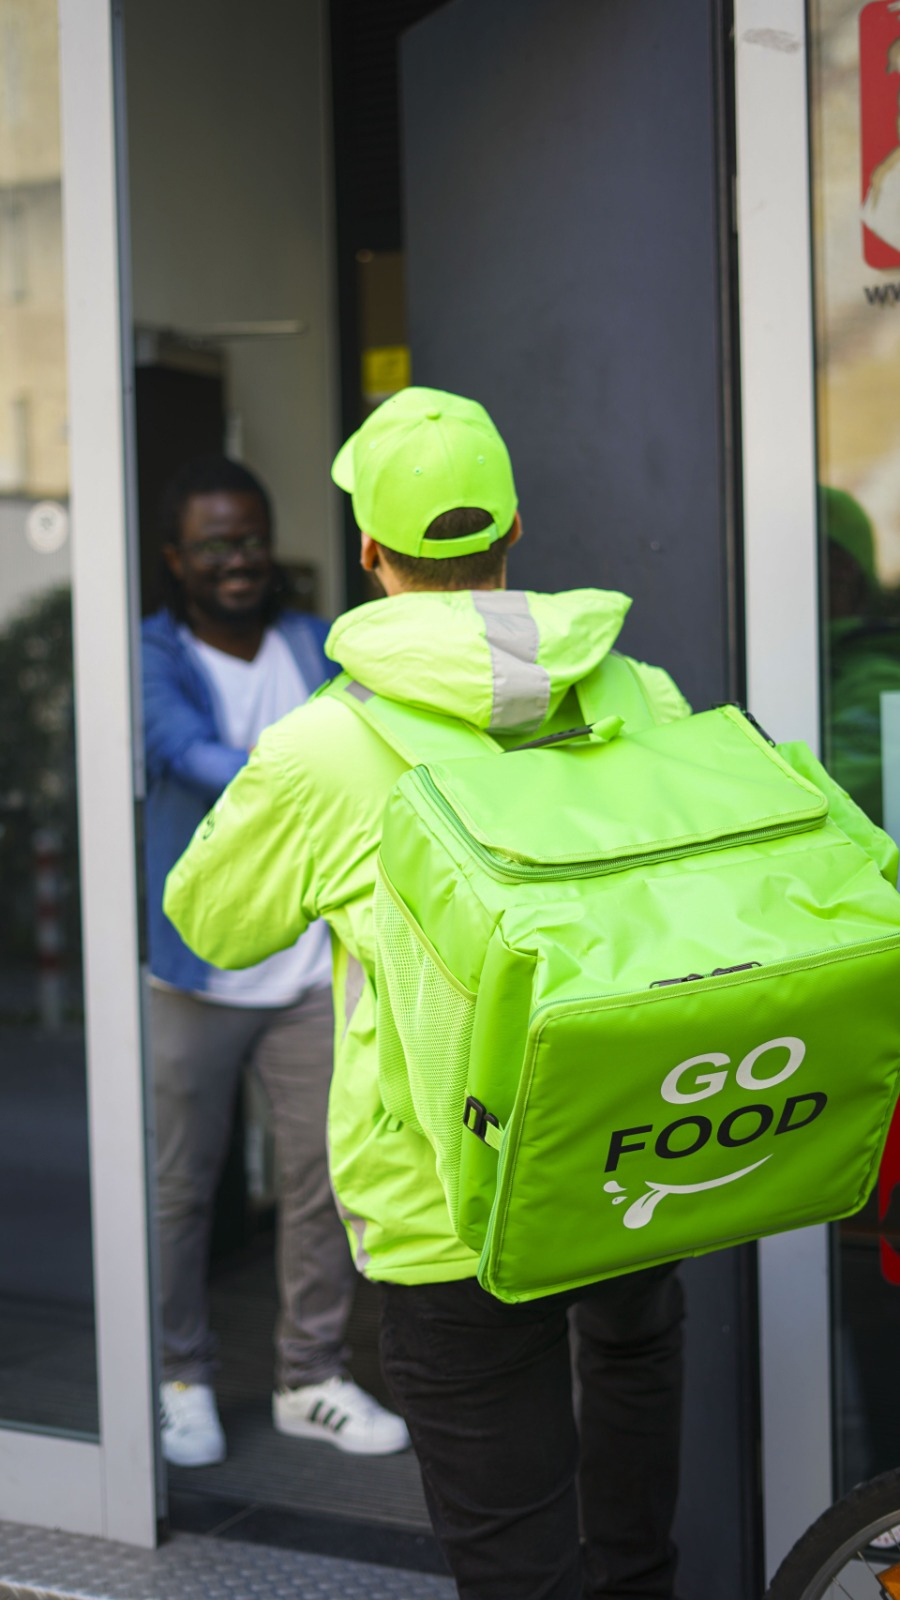 Delivery worker in ‘GO FOOD’ uniform standing at a glass door, ready to enter or exit, with another individual visible inside.